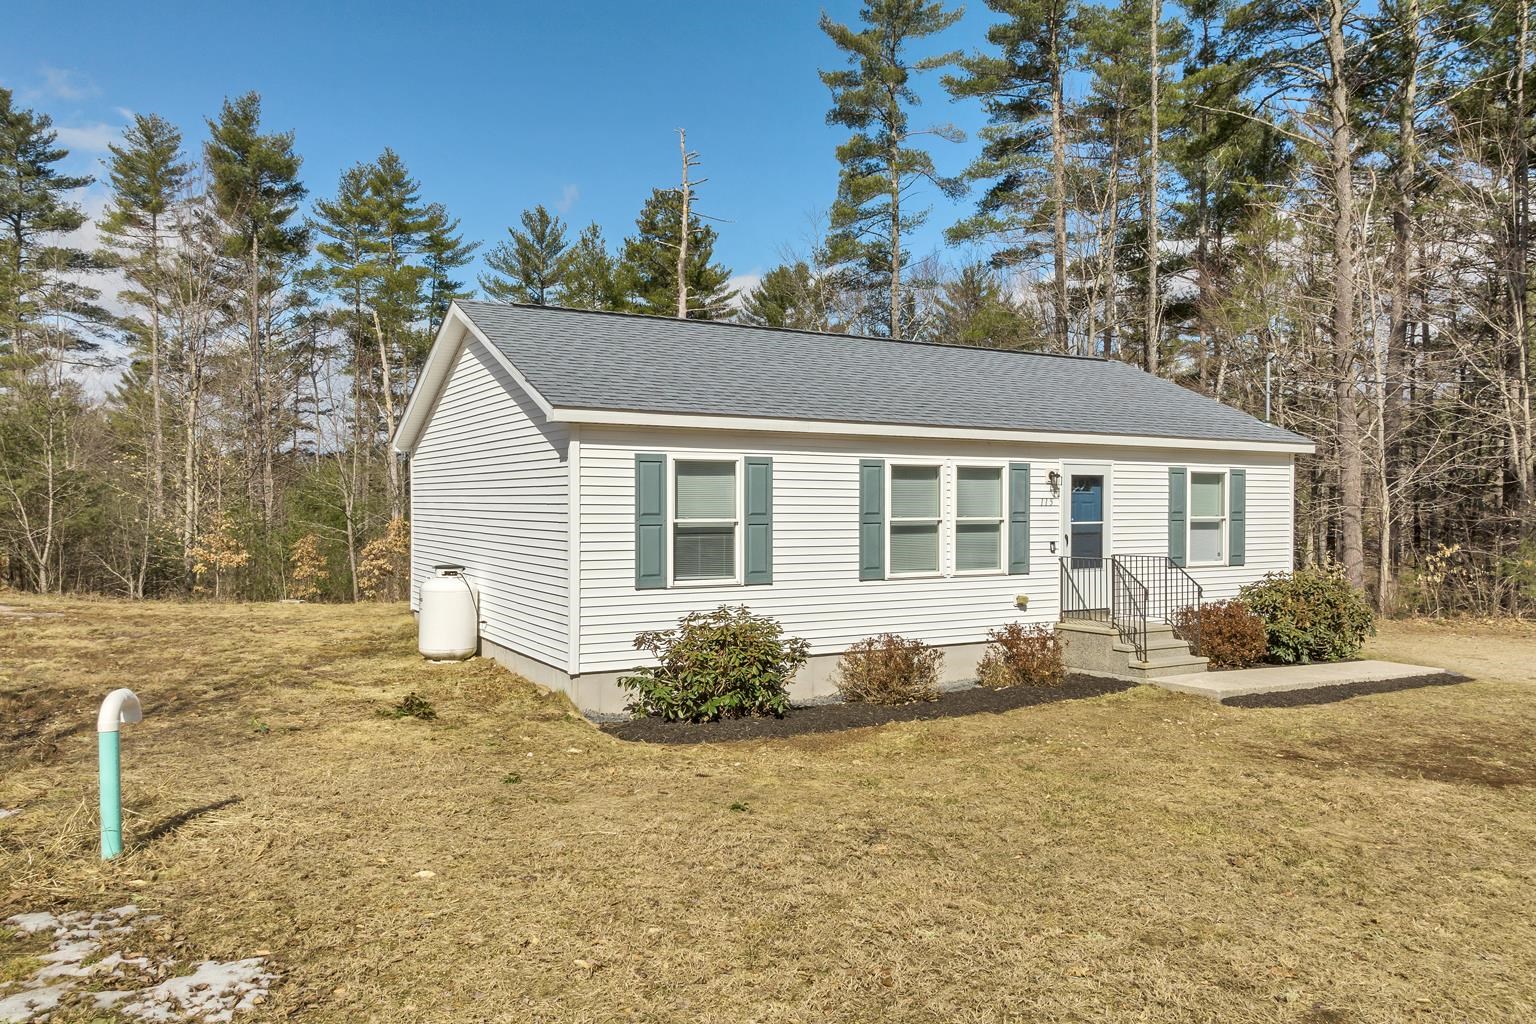 FREEDOM NH Homes for sale